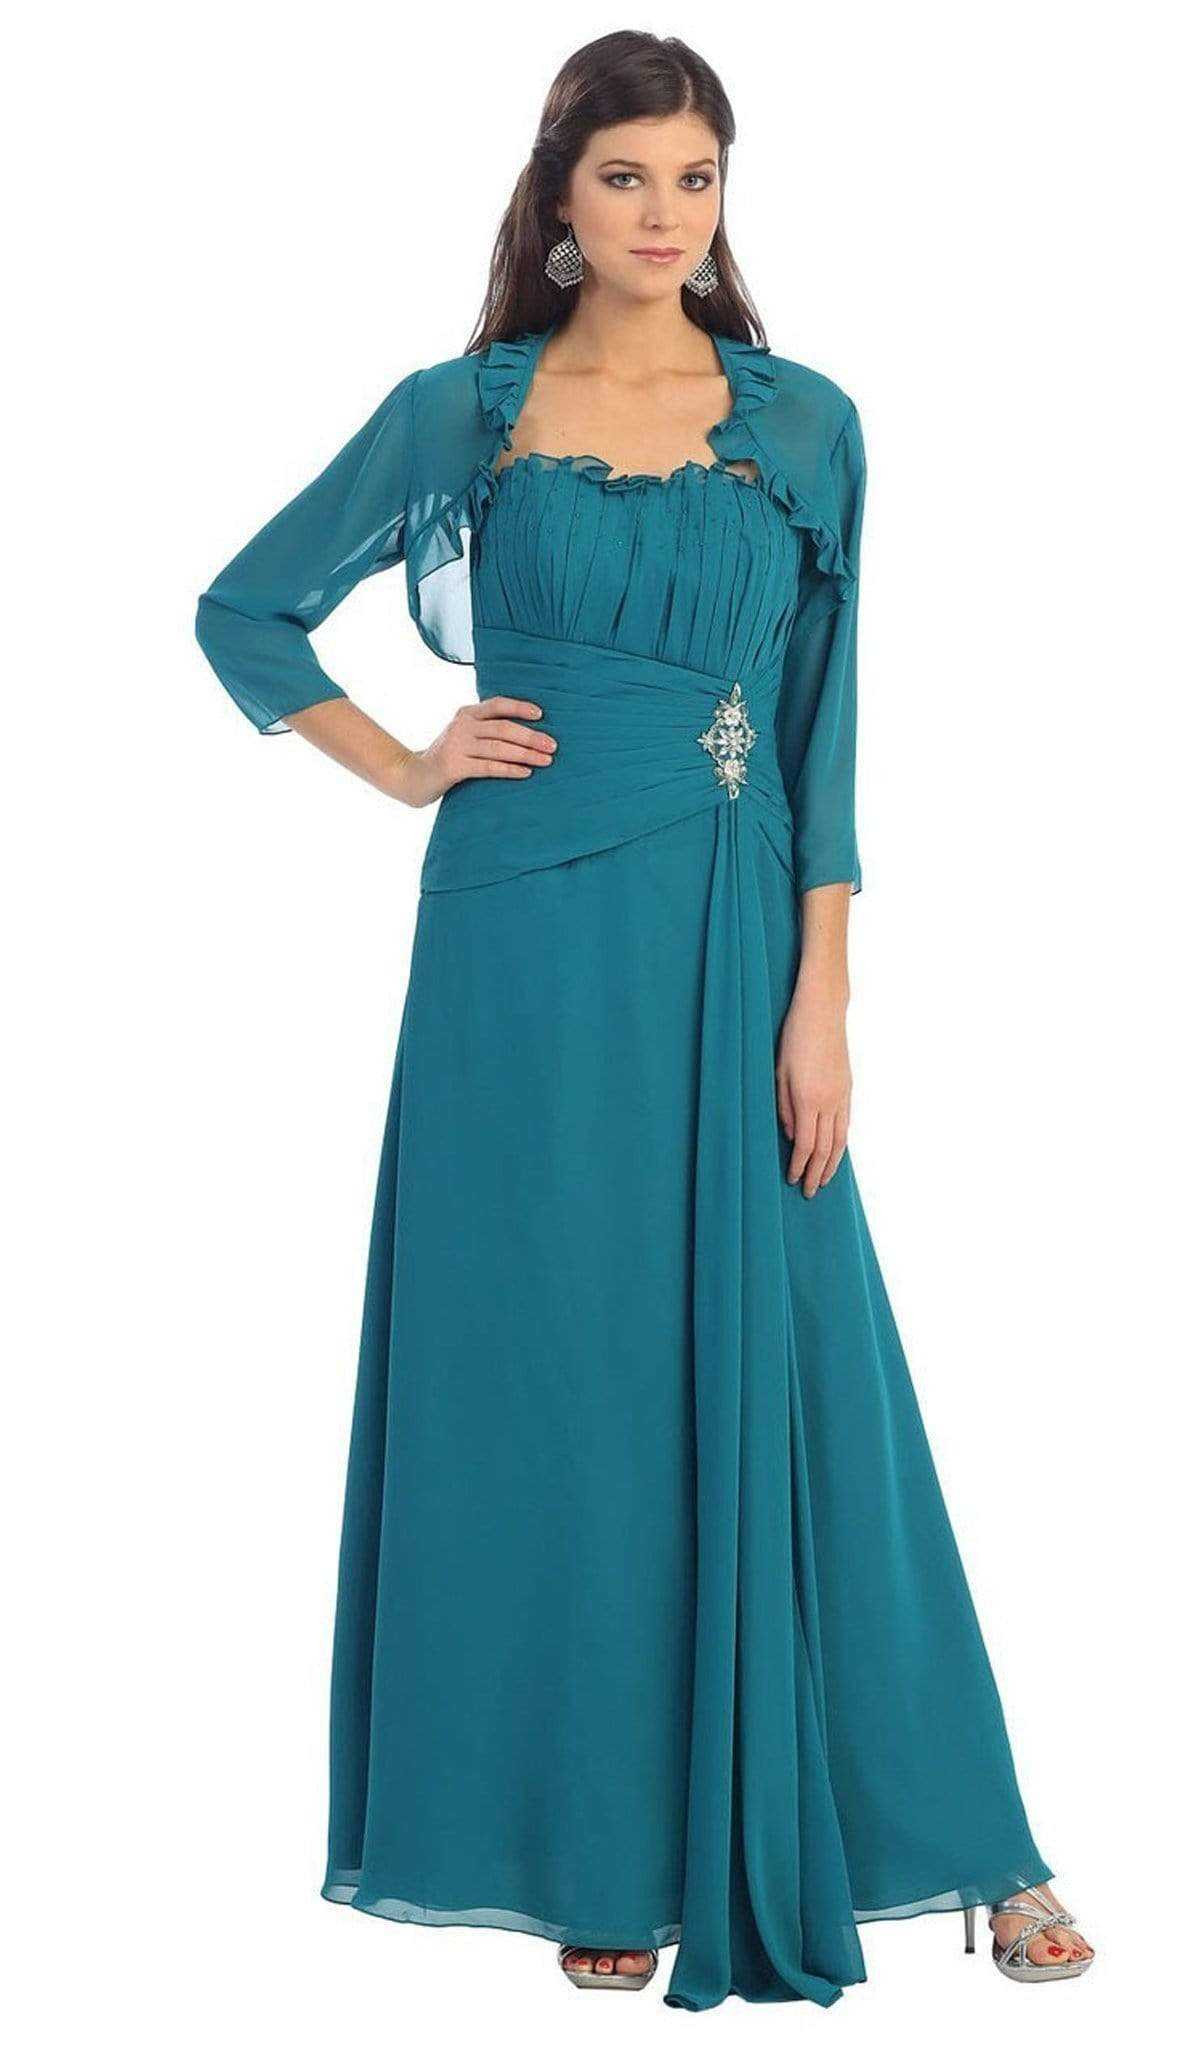 May Queen, May Queen - Strapless Pleated A-Line Gown with Bolero MQ 630 - 1 Pc Teal in Size L Available